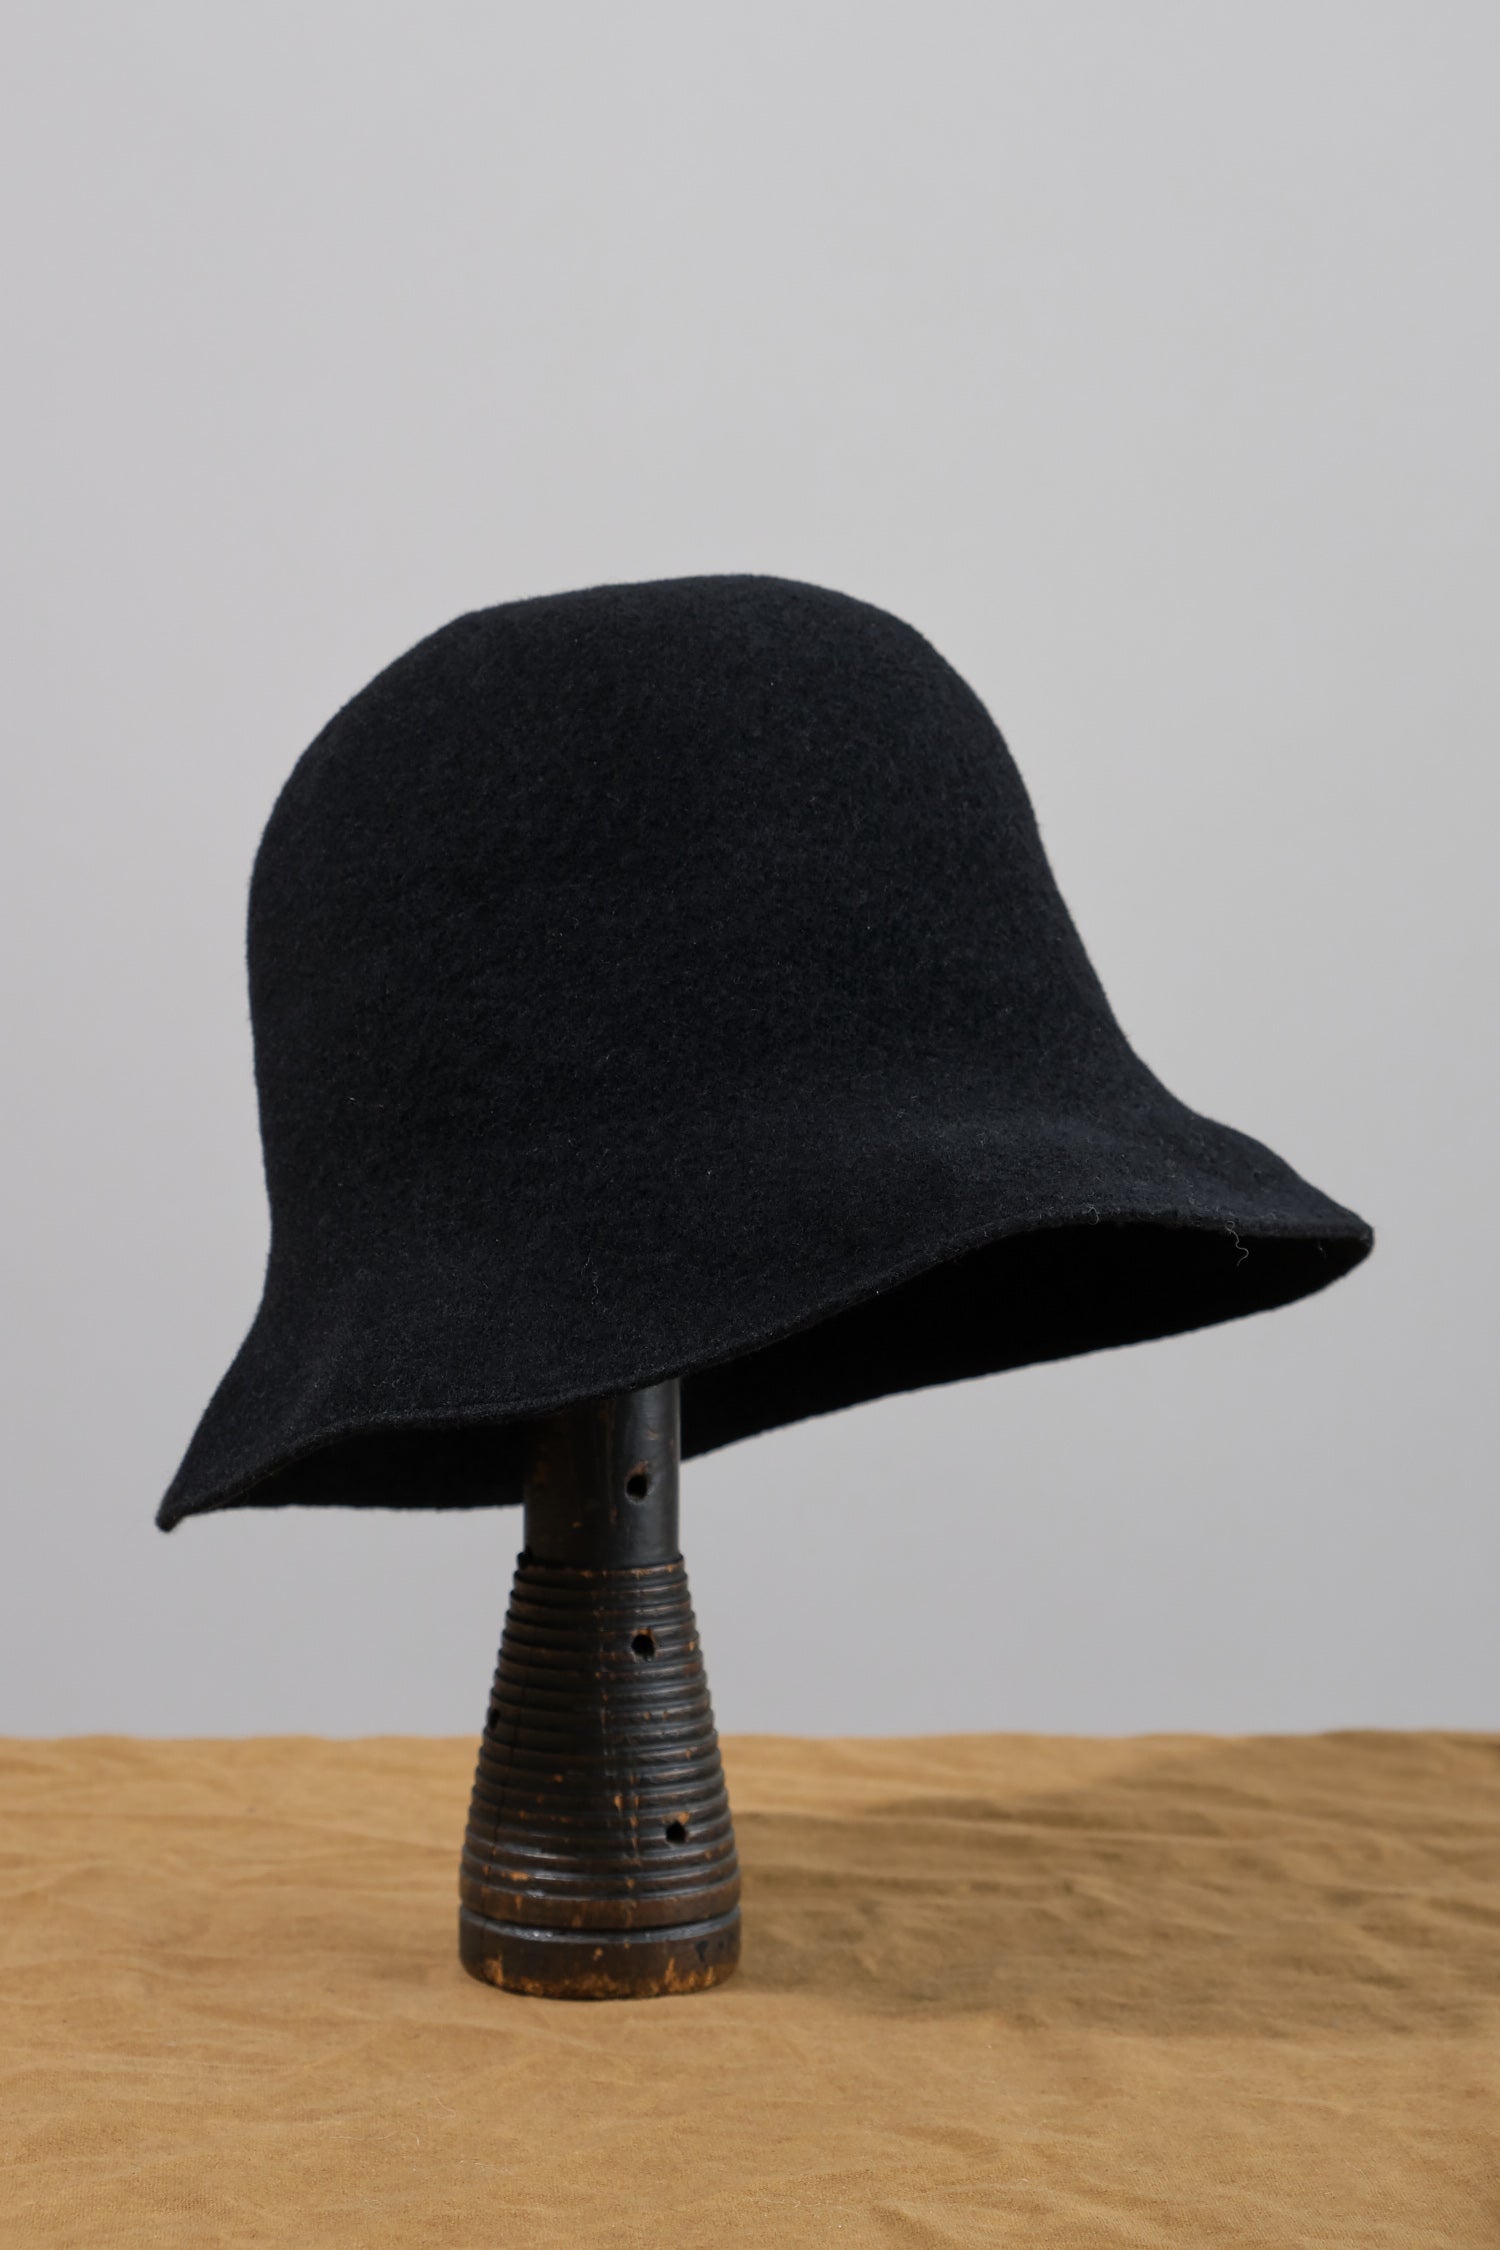 Widen Bell Hat in Black on stand